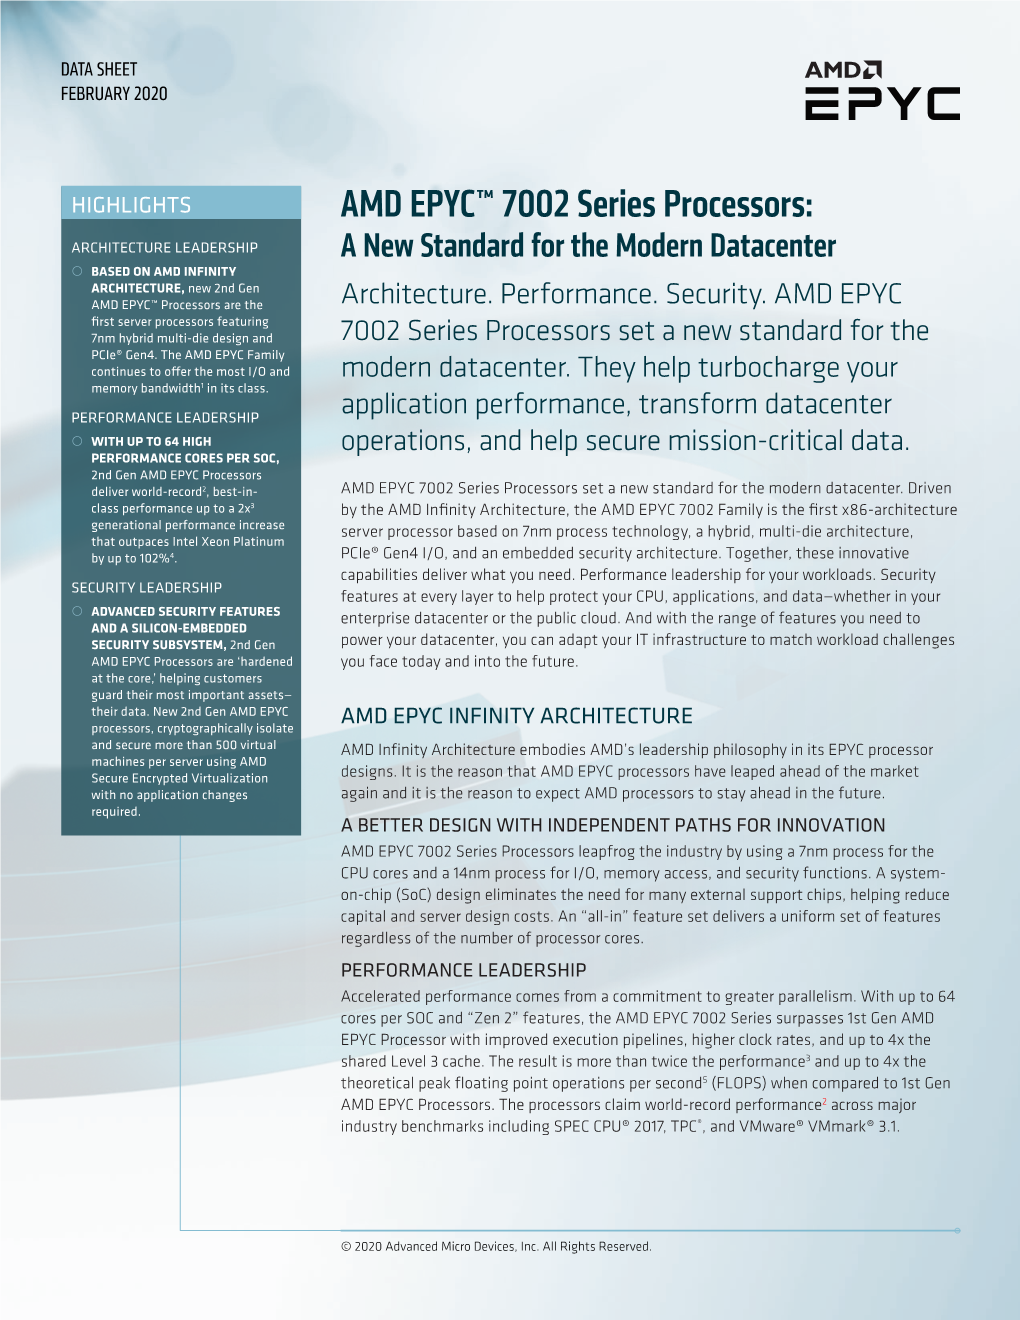 AMD EPYC™ 7002 Series Processors: a New Standard for the Modern